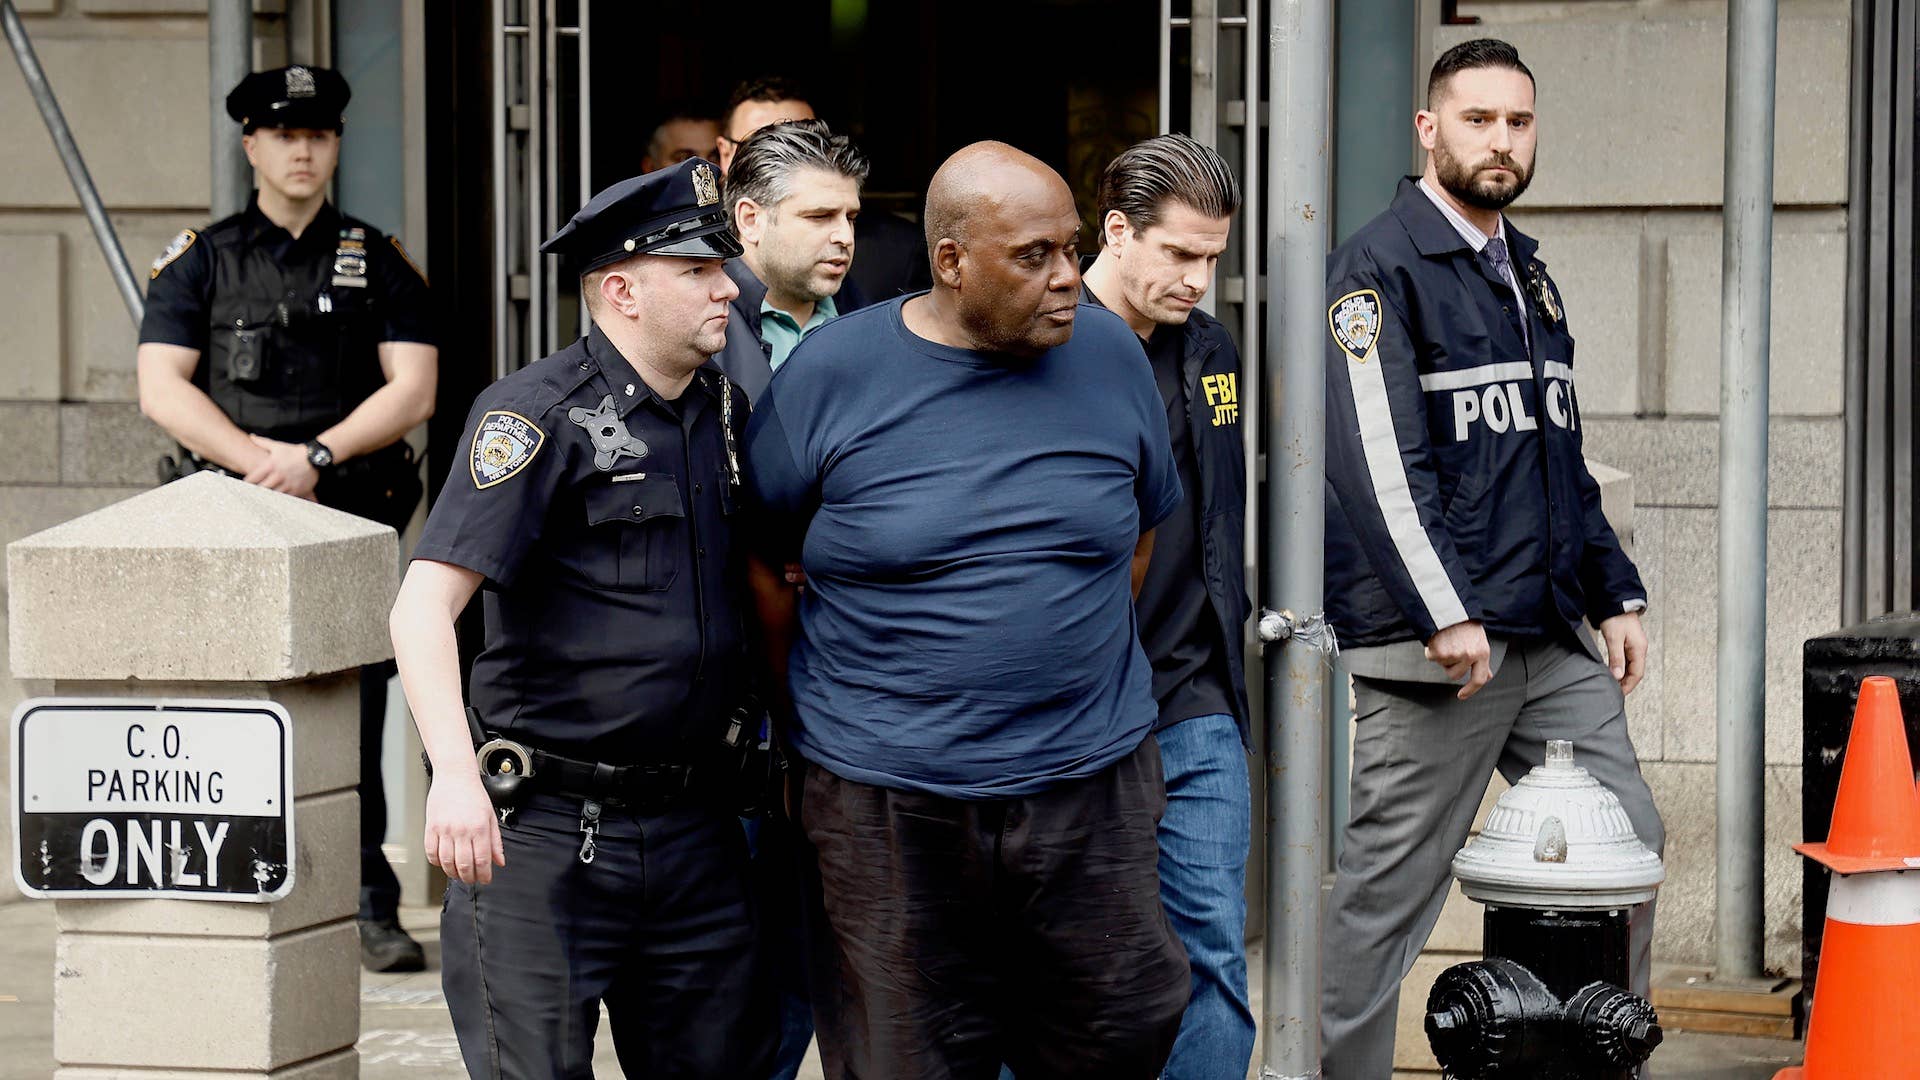 Suspected subway shooter, Frank James is escorted out by the FBI and NYPD officers